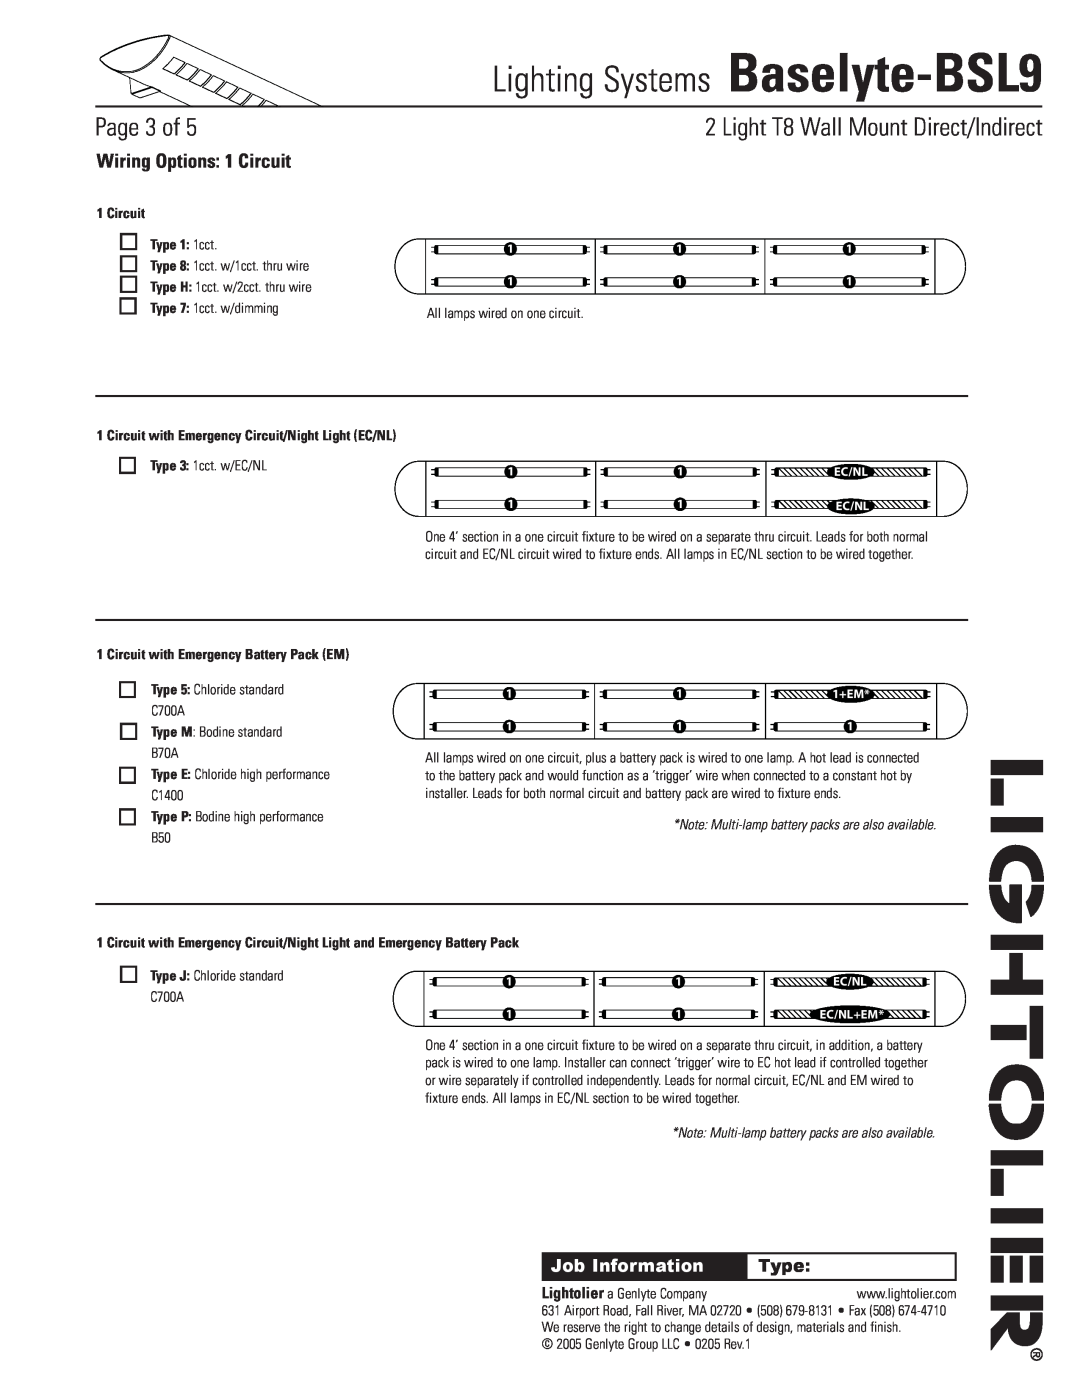 Lightolier Baselyte-BSL9 Wiring Options 1 Circuit, Circuit Type 1 1cct, Circuit with Emergency Battery Pack EM, Page of 